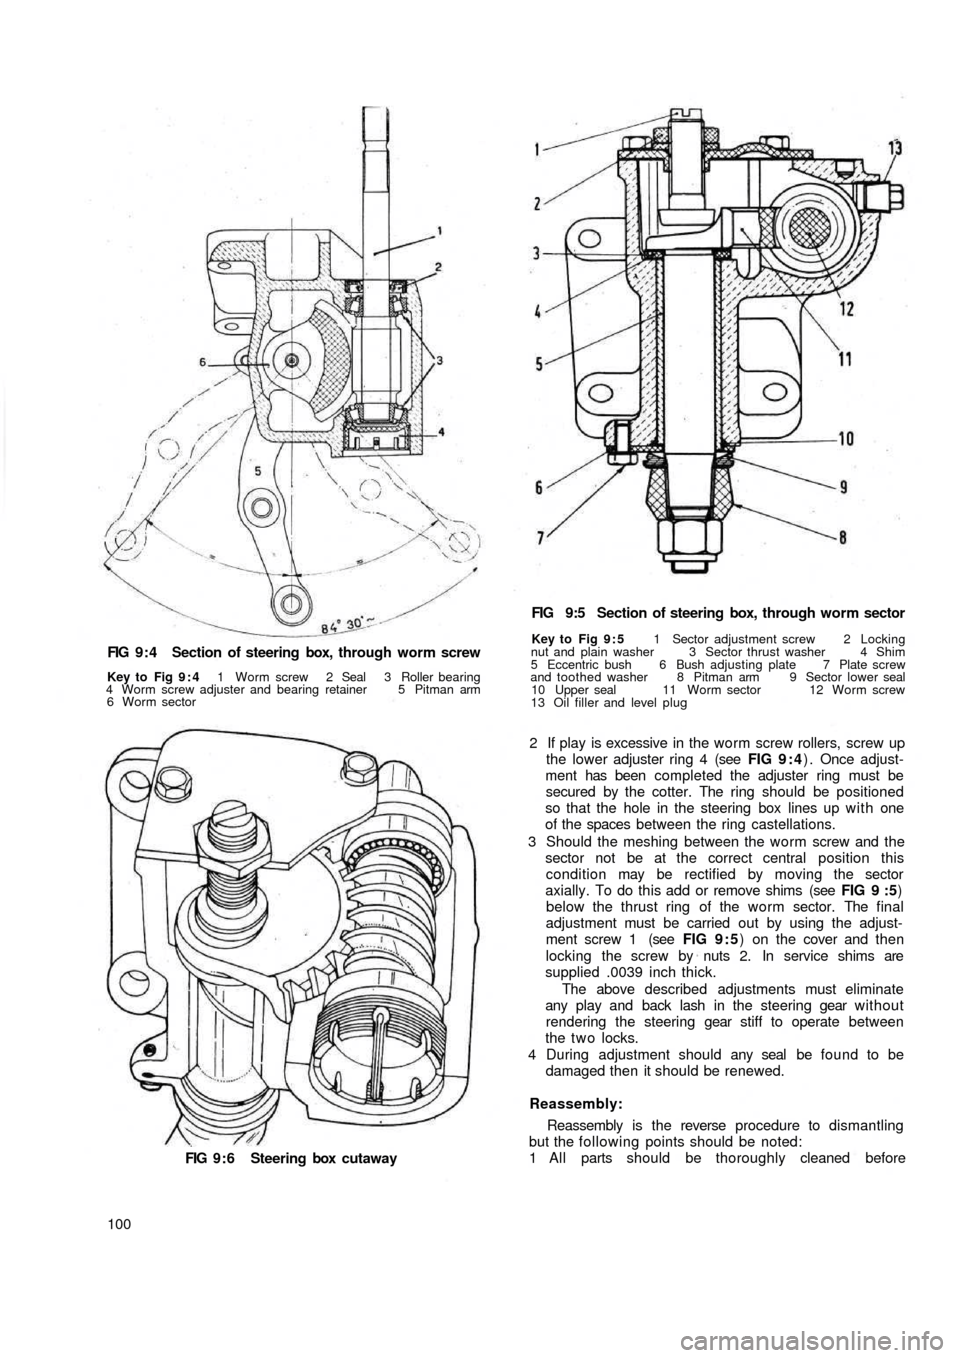 FIAT 500 1970 1.G Workshop Manual FIG 9 : 4  Section of steering box,  through worm screw
Key to  Fig 9 : 4 1 Worm screw 2 Seal 3 Roller bearing
4 Worm screw adjuster and bearing retainer 5 Pitman arm
6 Worm sector
FIG 9 : 6  Steering